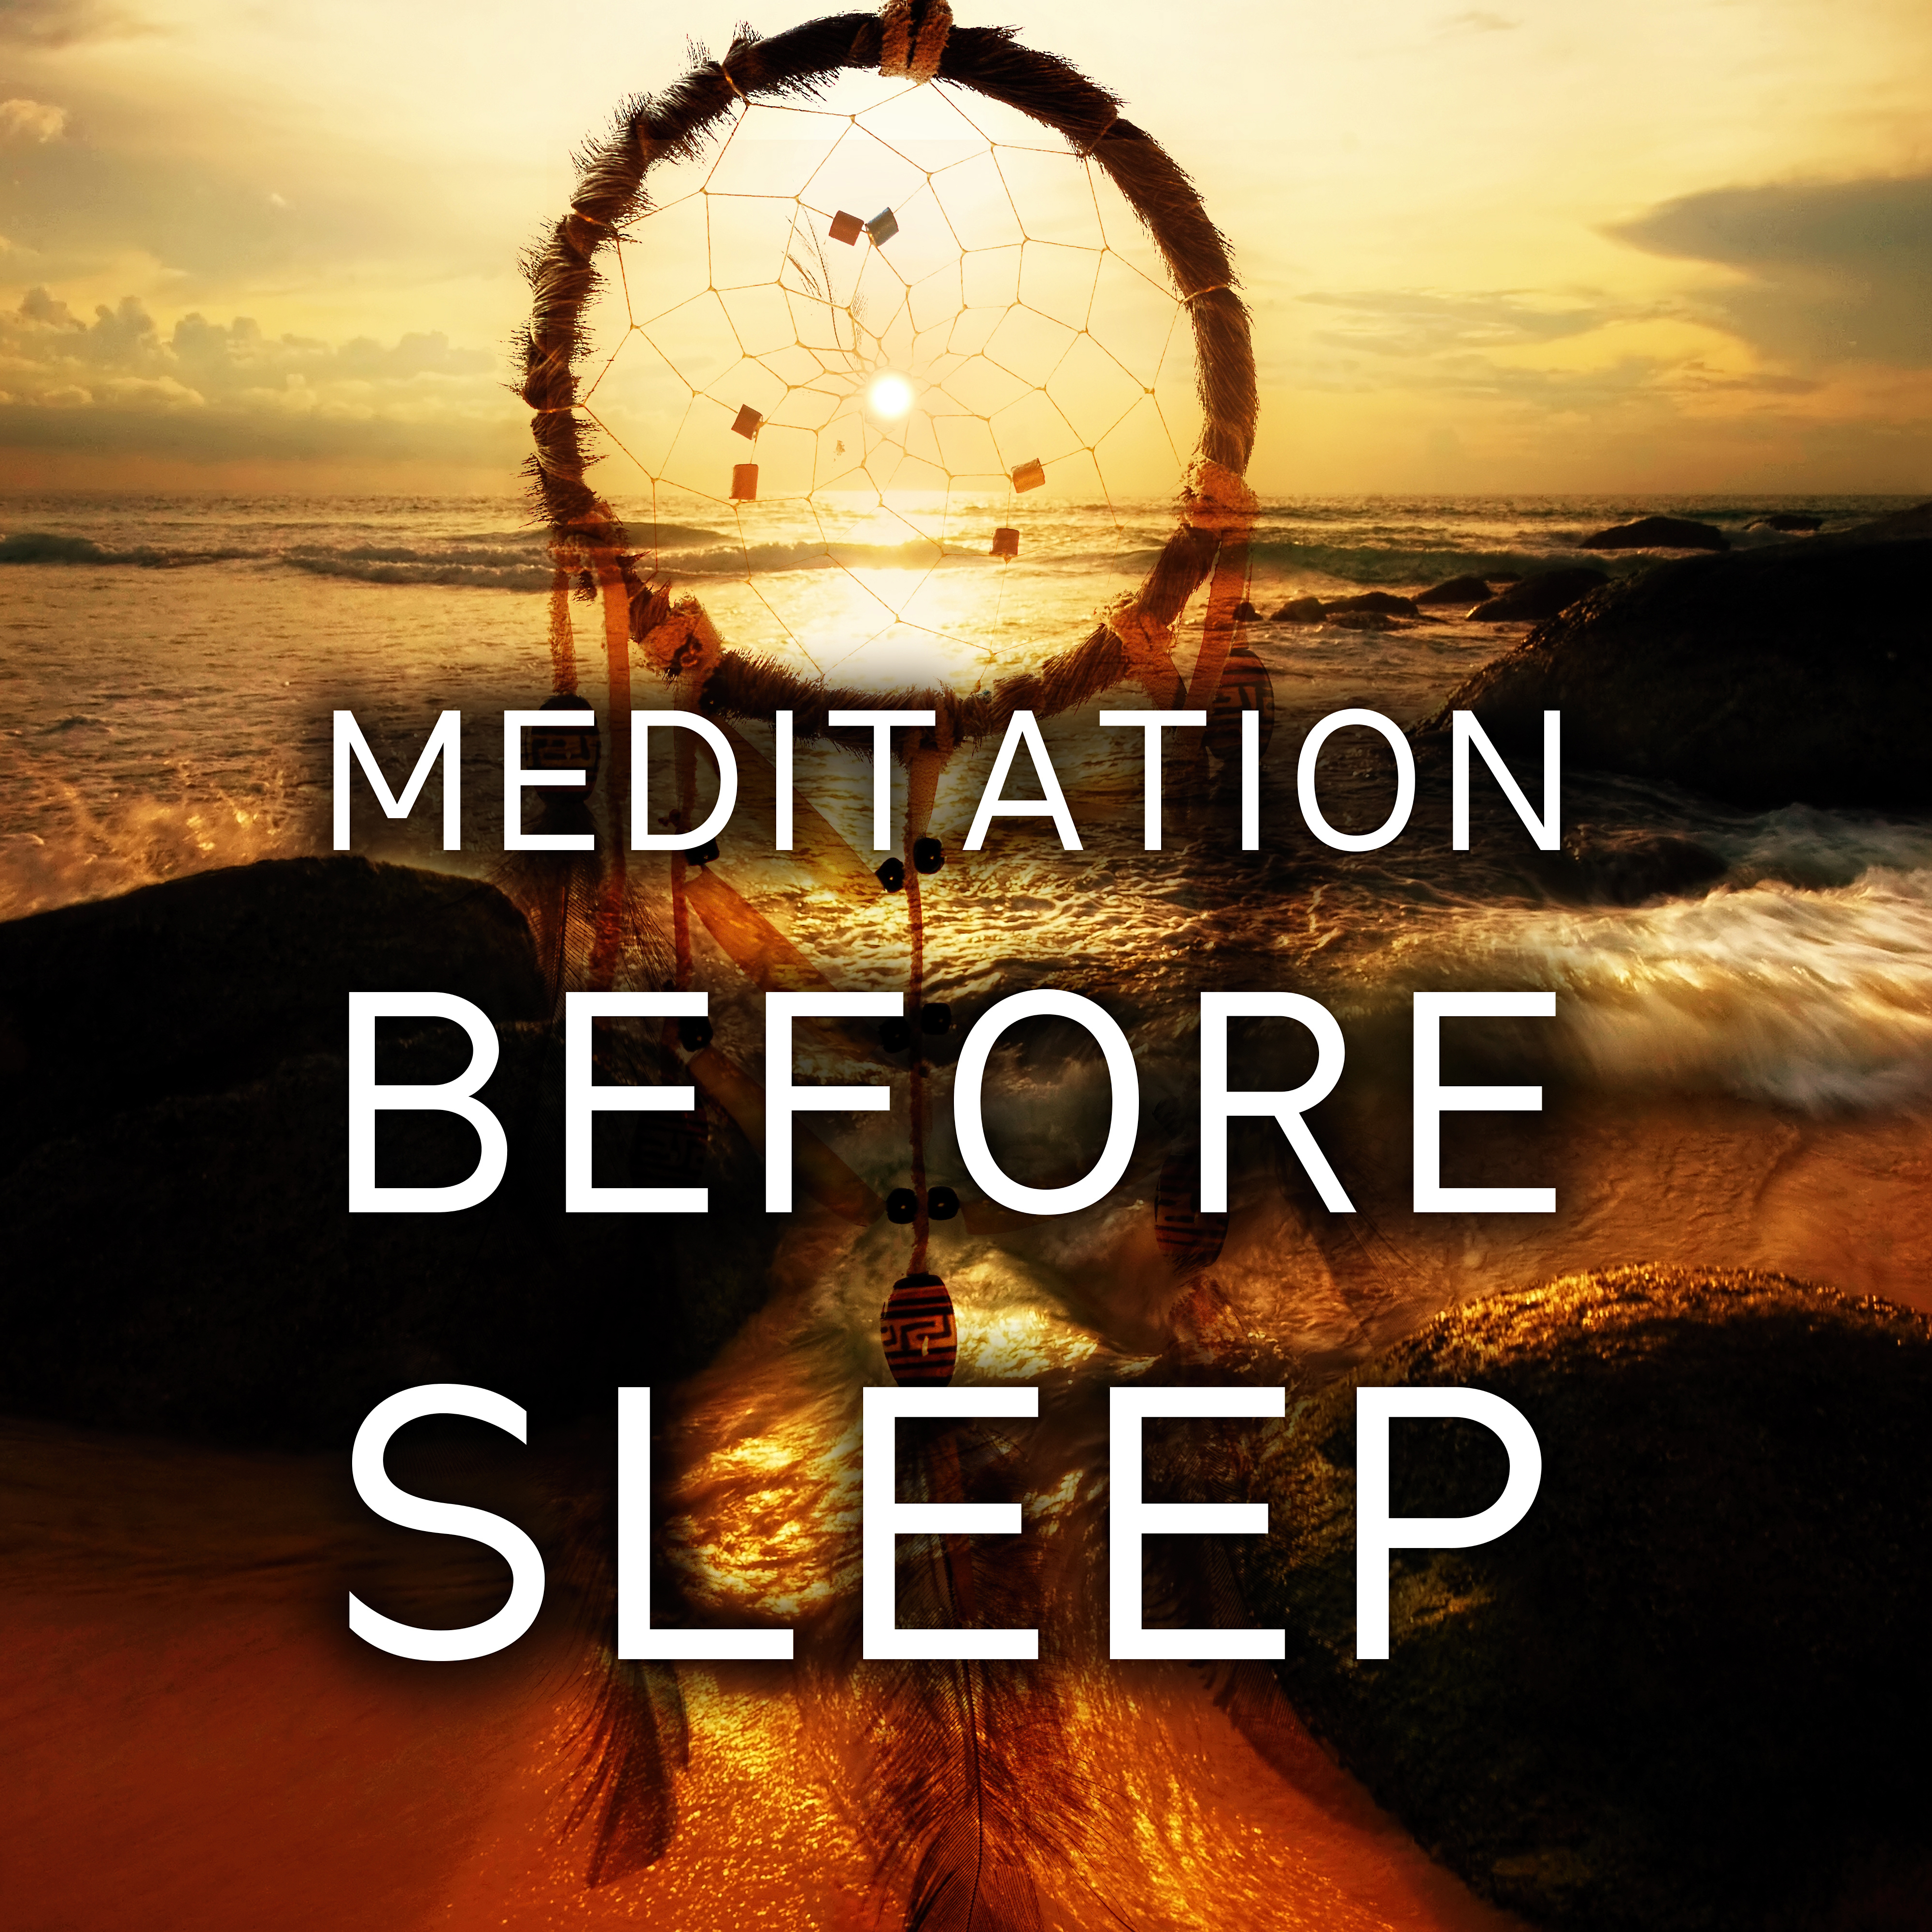 Meditation Before Sleep - Sleep Meditation Music and Bedtime Songs to Help You Relax, Meditate, Rest, Destress